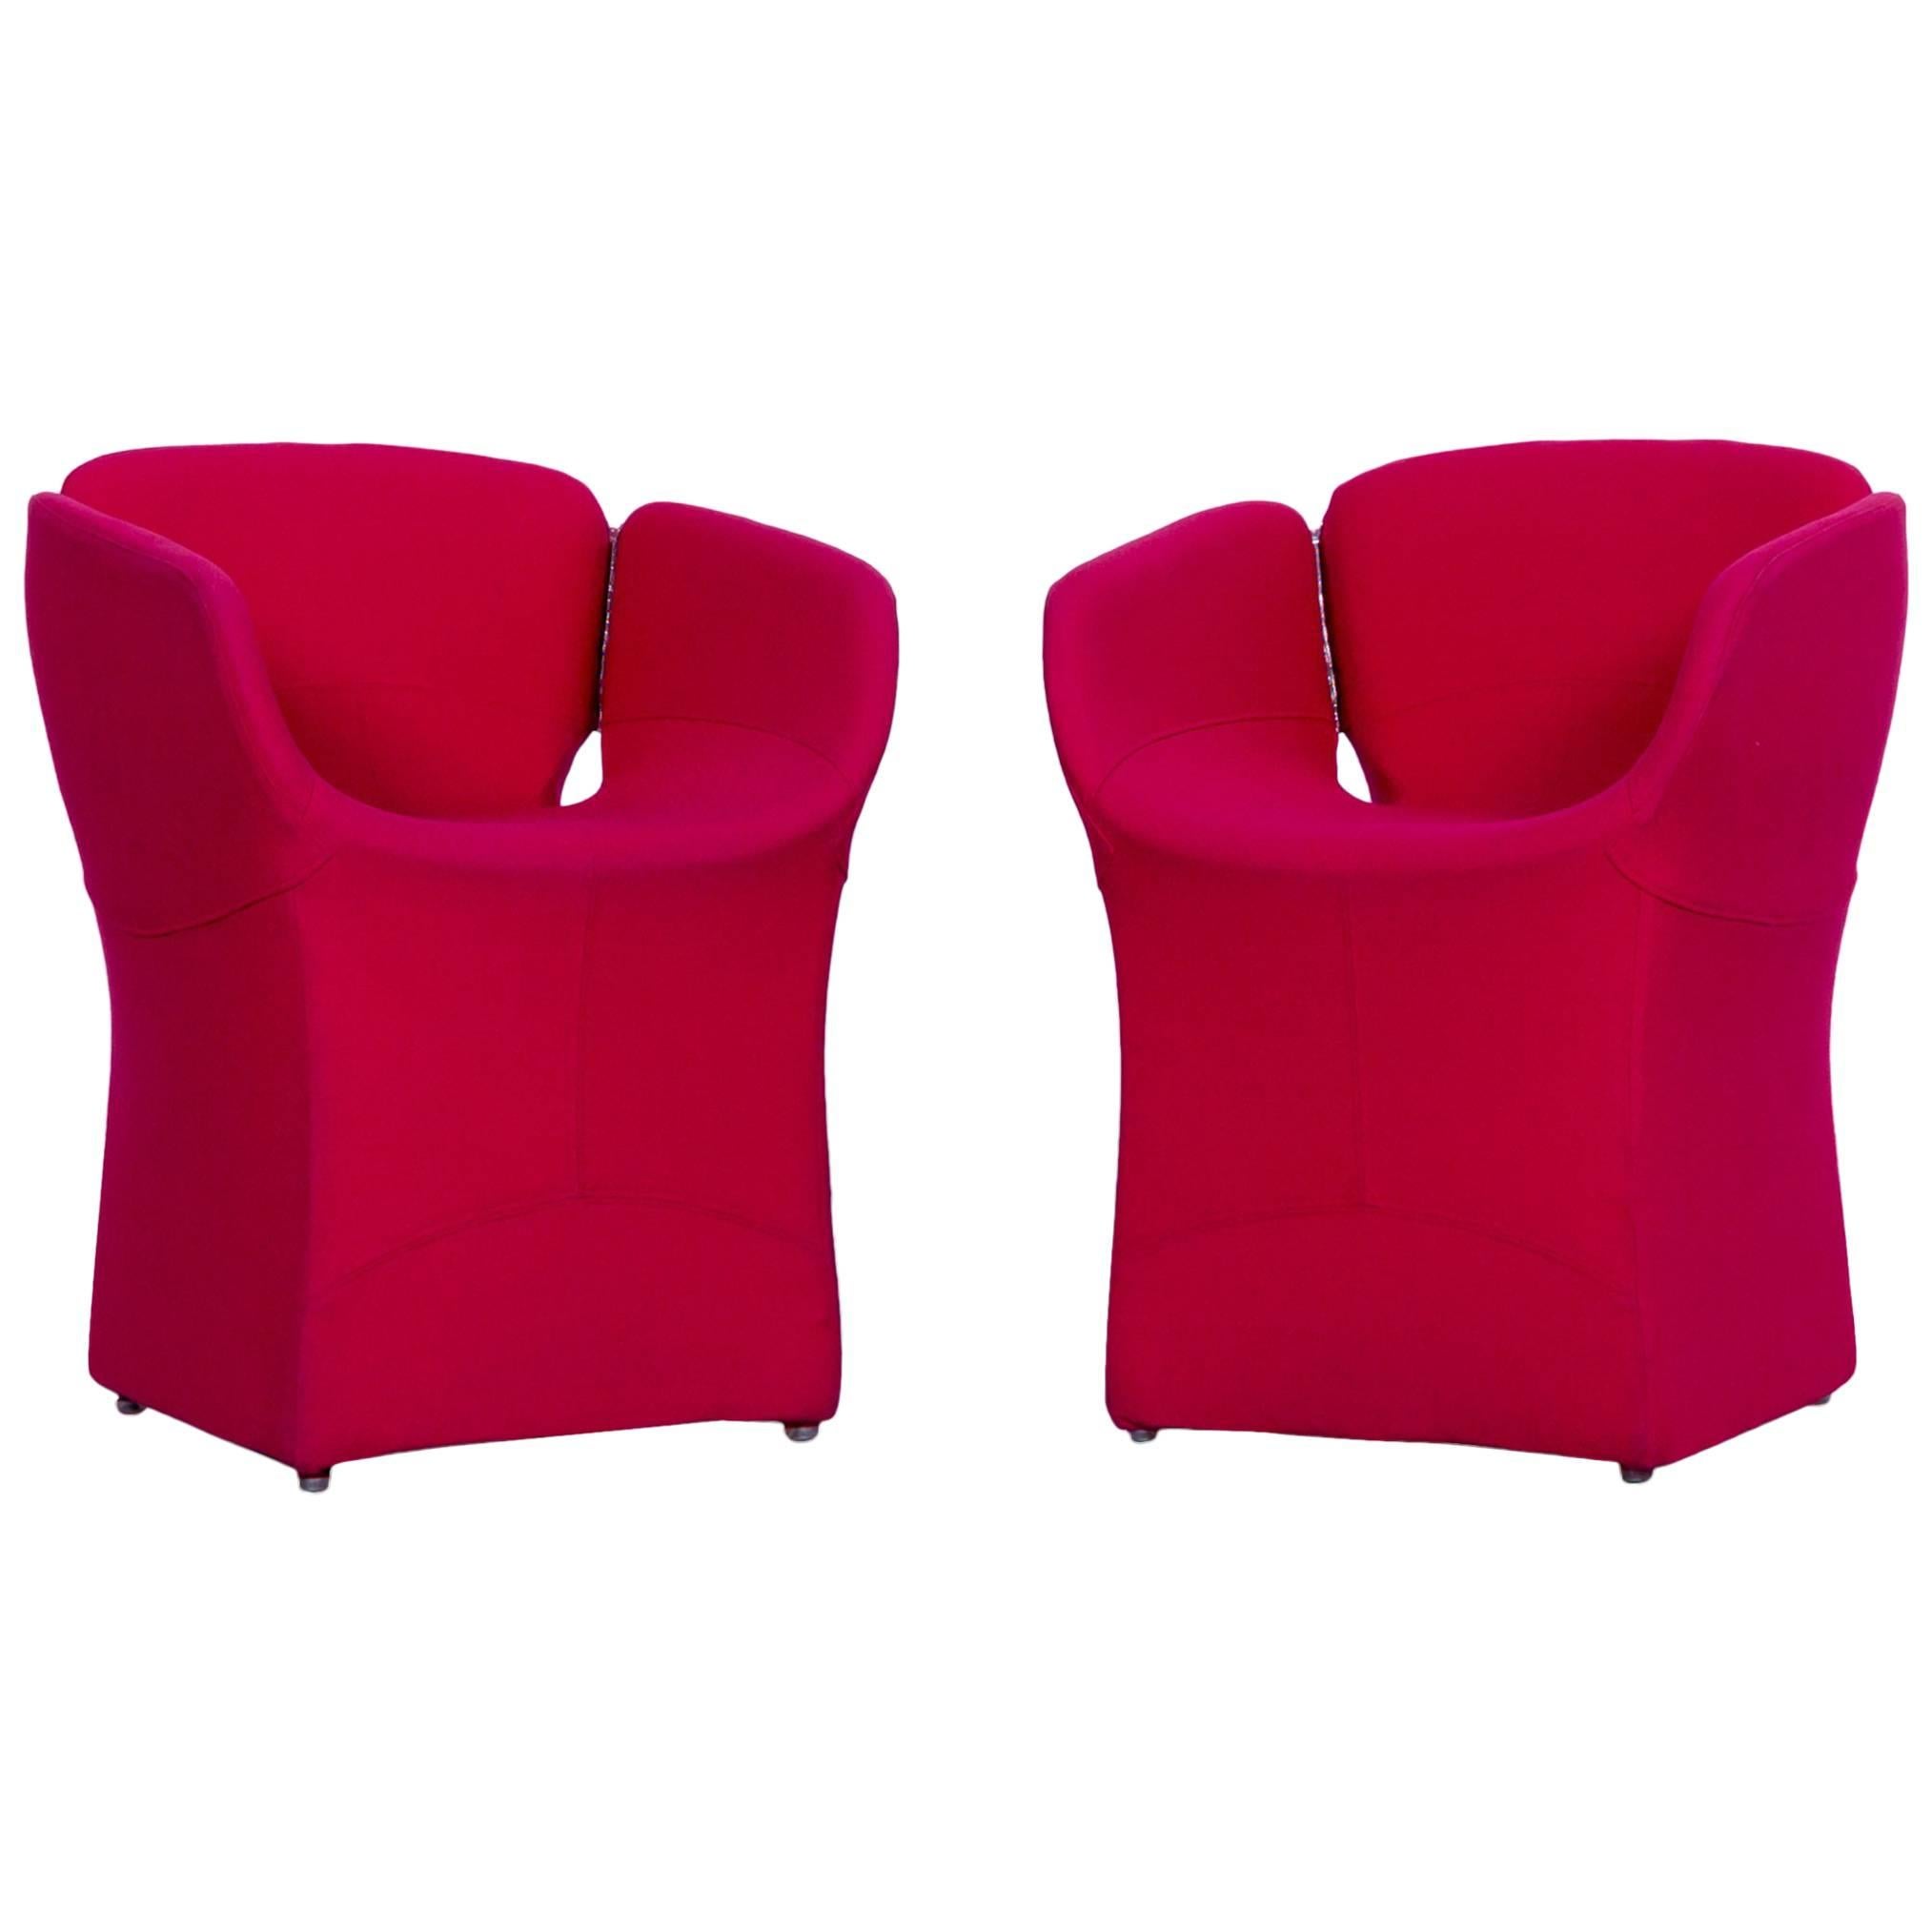 Set of Two Moroso Bloomy Designer Chair Quality Red Fabric by Patricia Urquiola